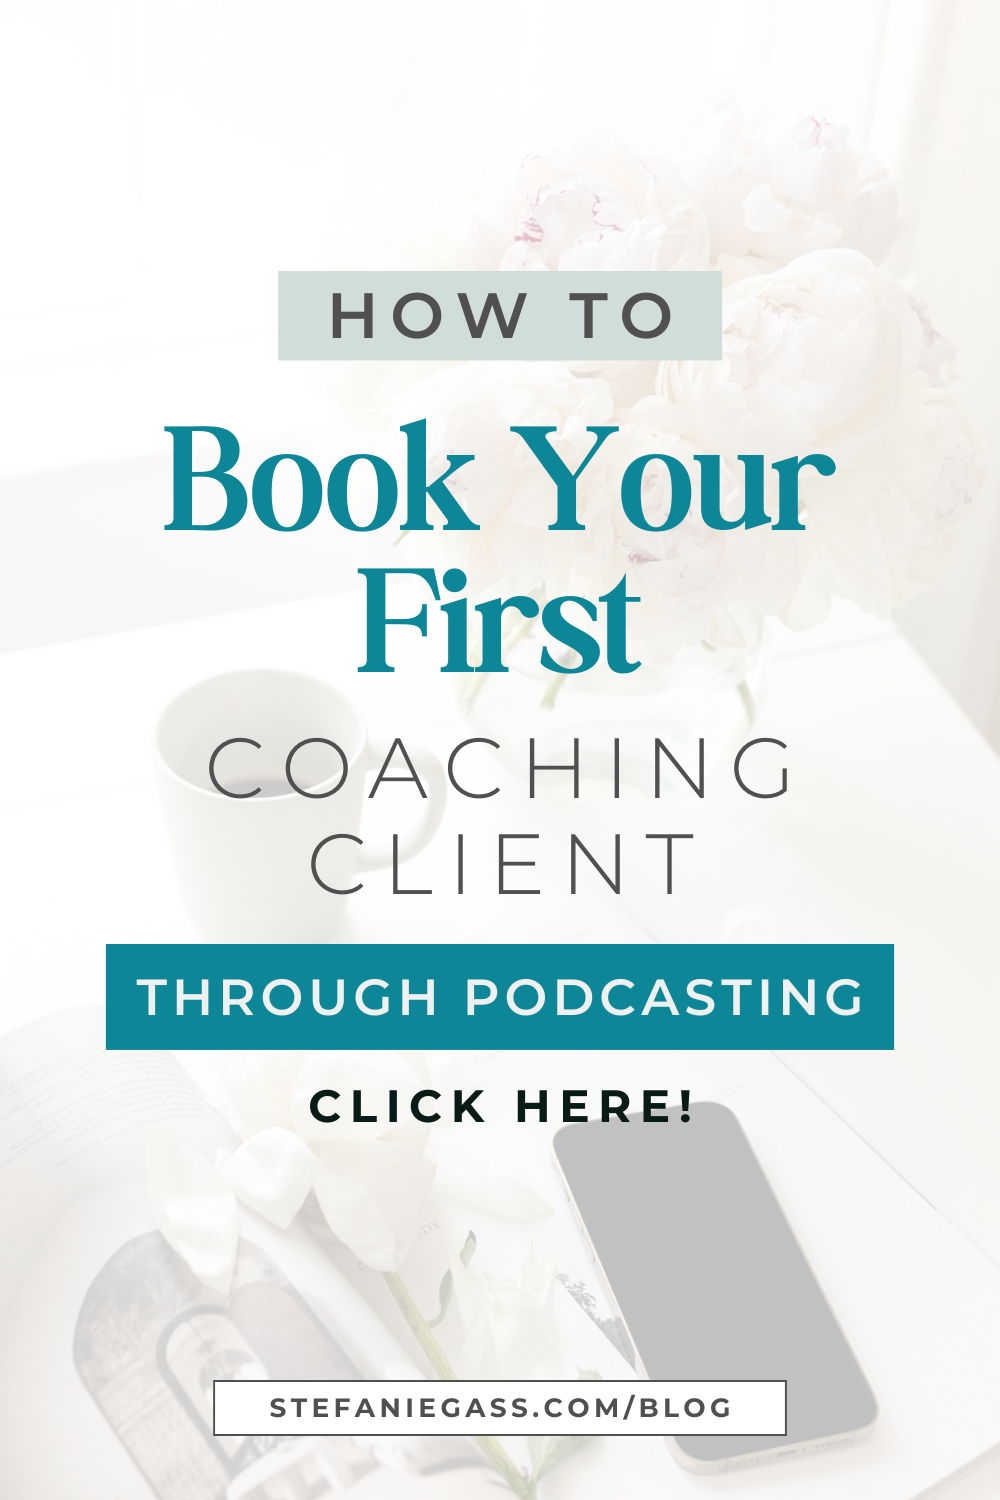 How to book your first coaching client through podcasting - click here